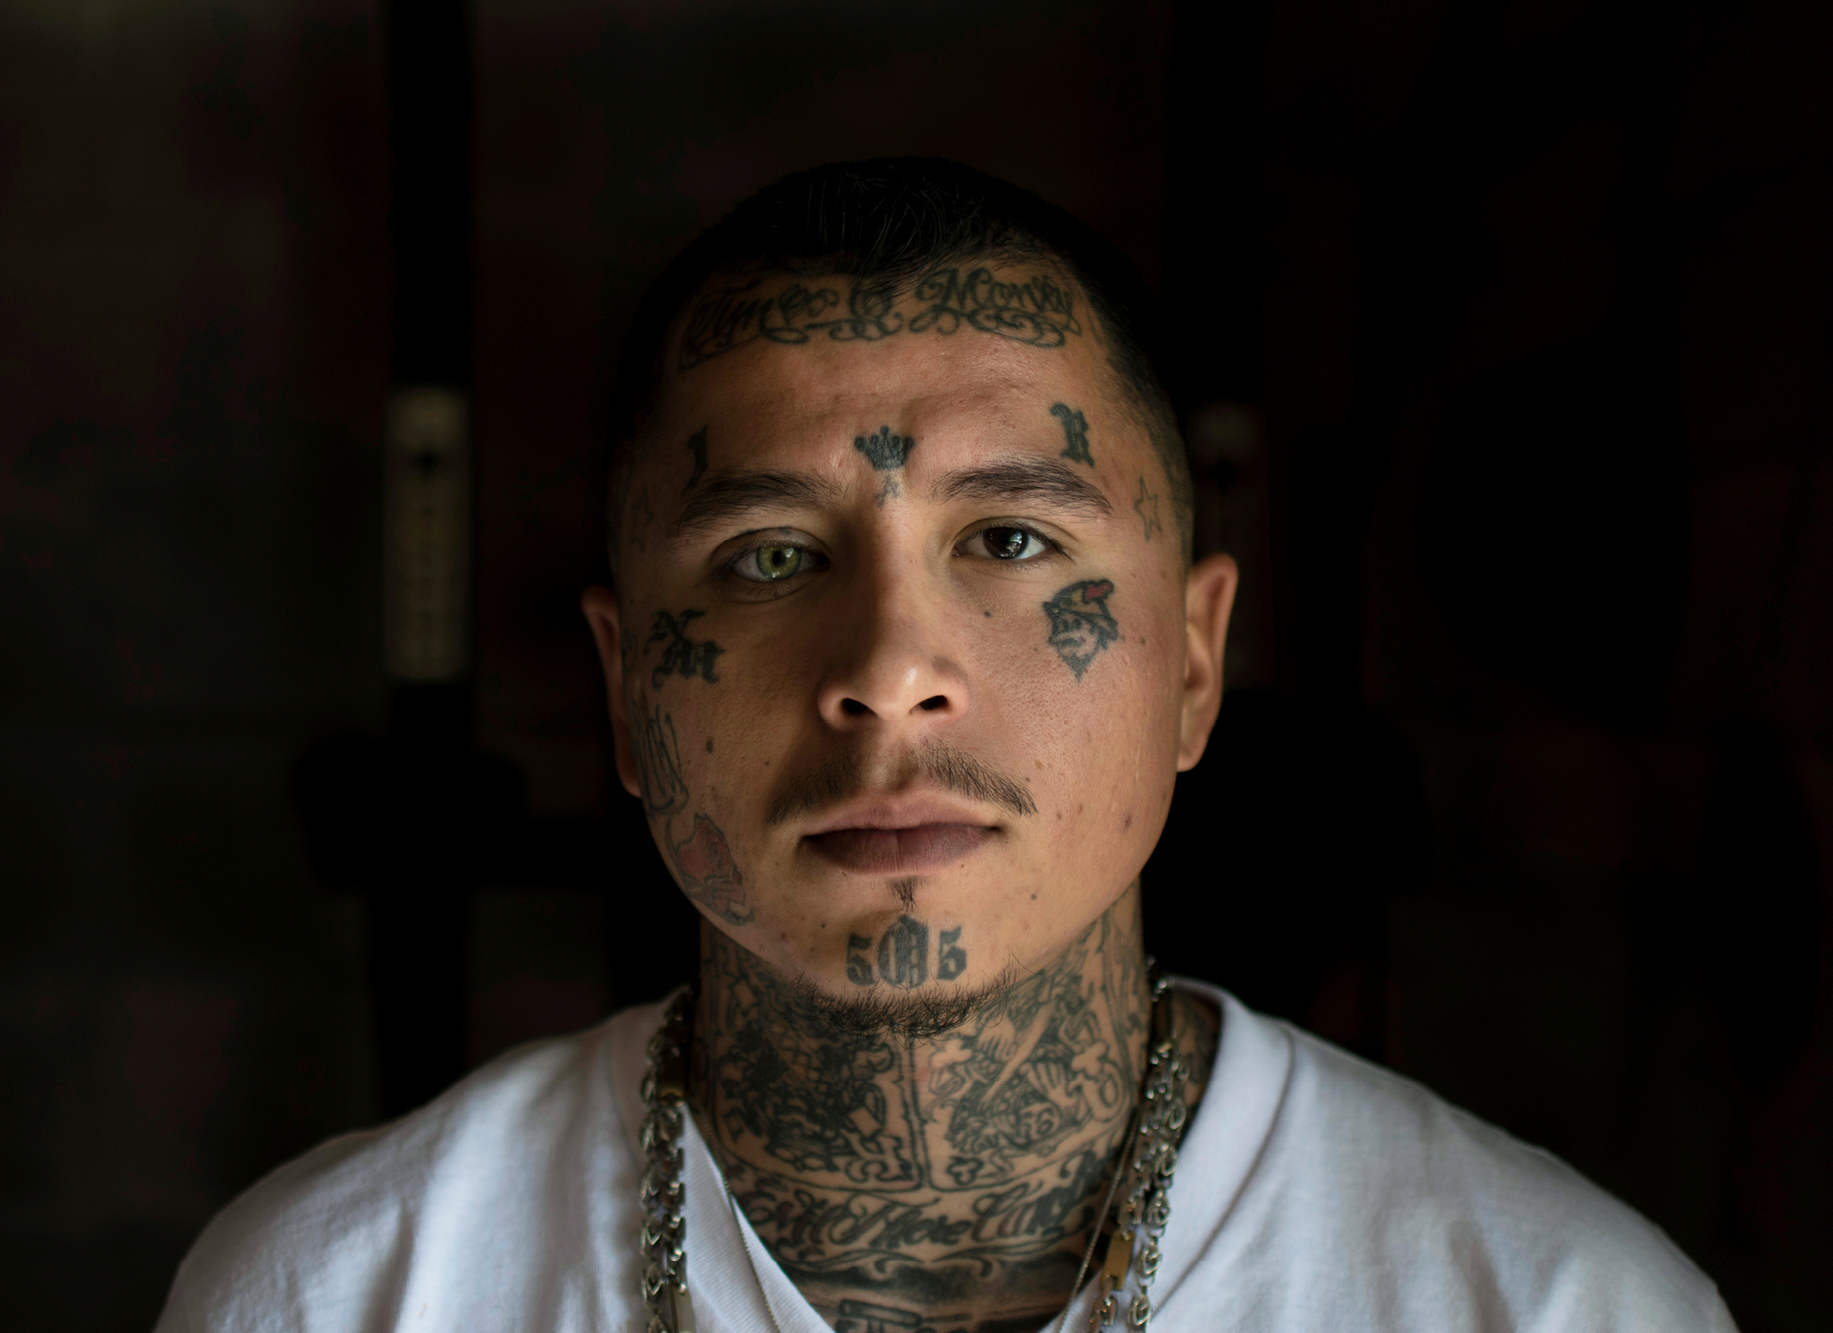 Picture of a man named Carlos who is a subject Frank Blazquez photographed.